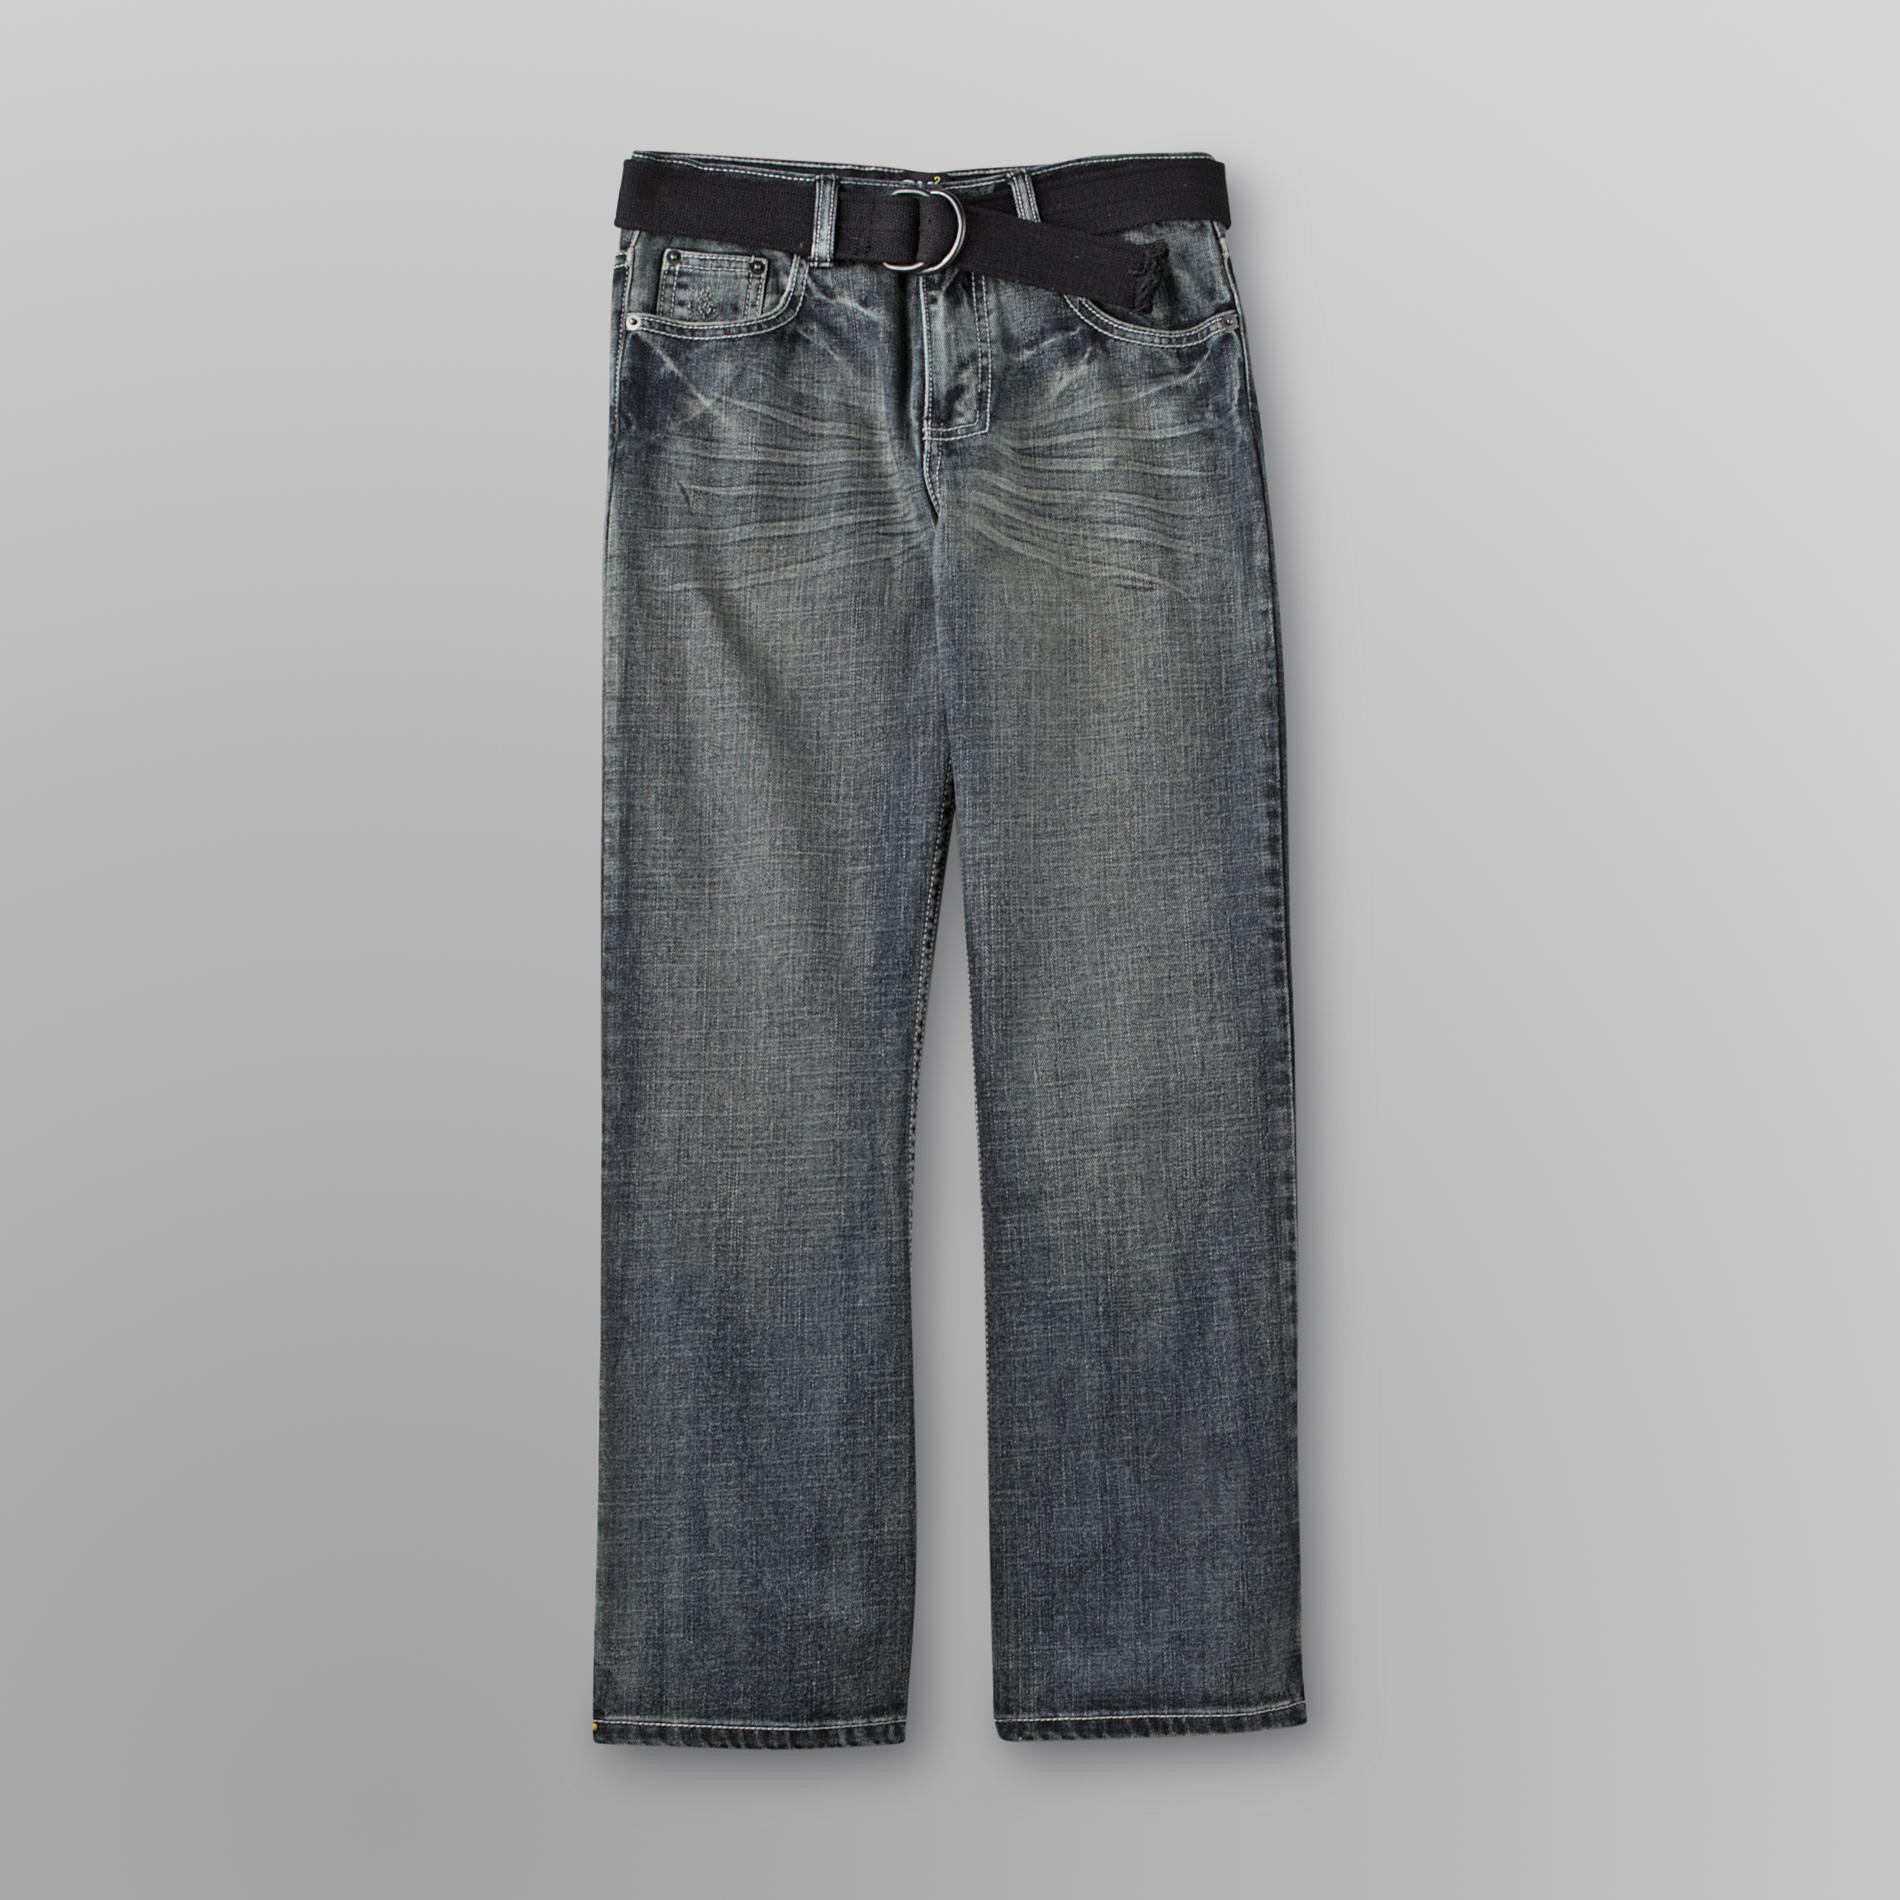 SK2 Boy's Belted Bootcut Jeans